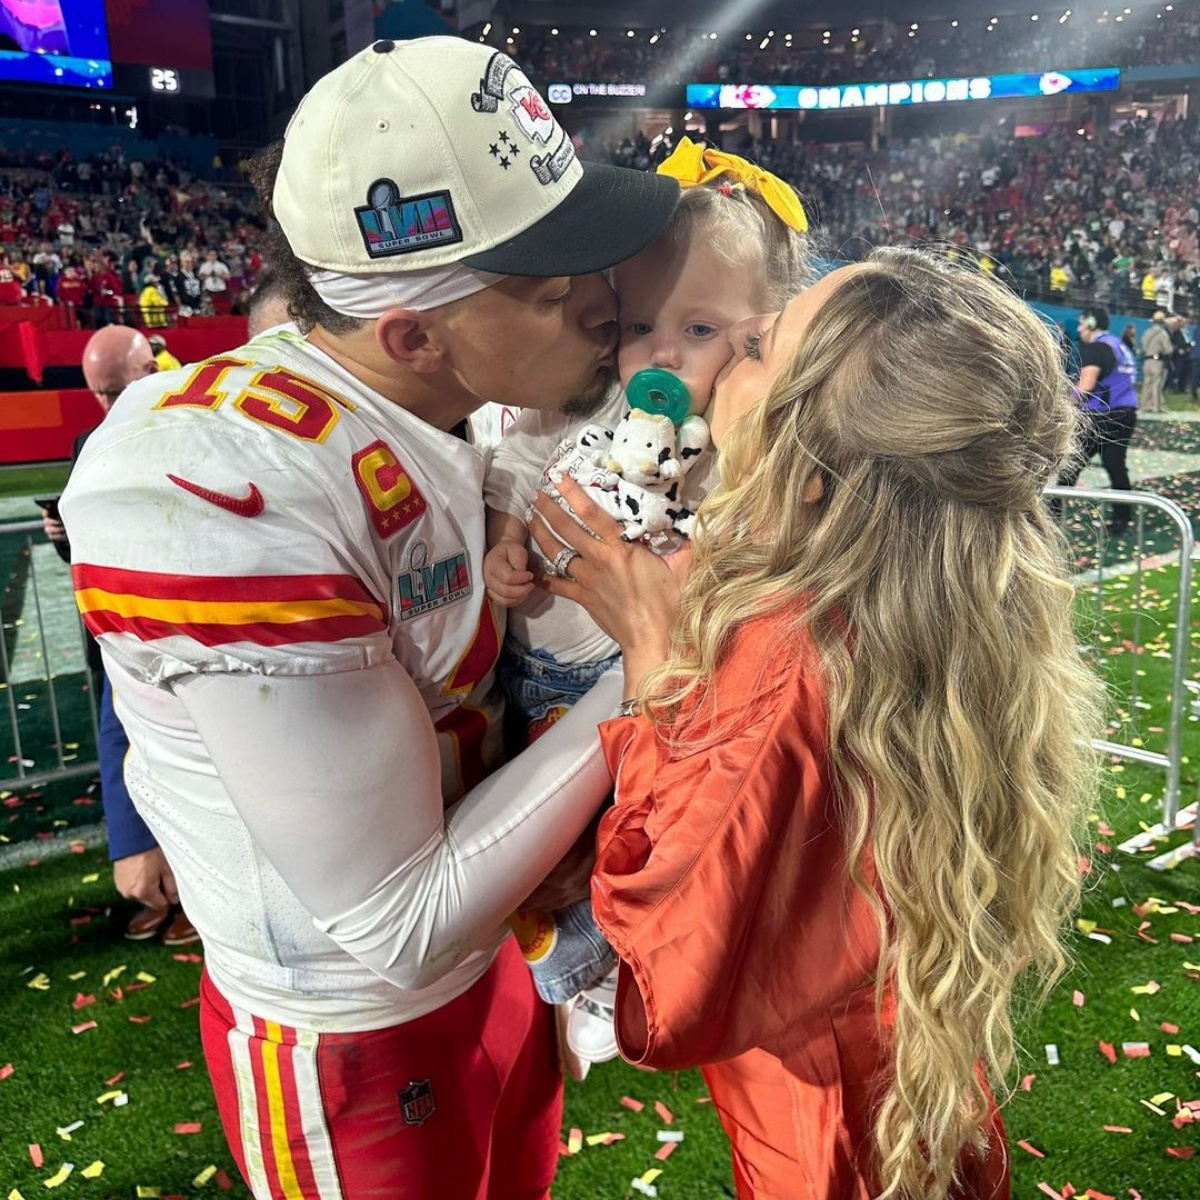 Brittany Mahomes' Daughter Sterling Models a Mini Louis Vuitton Purse